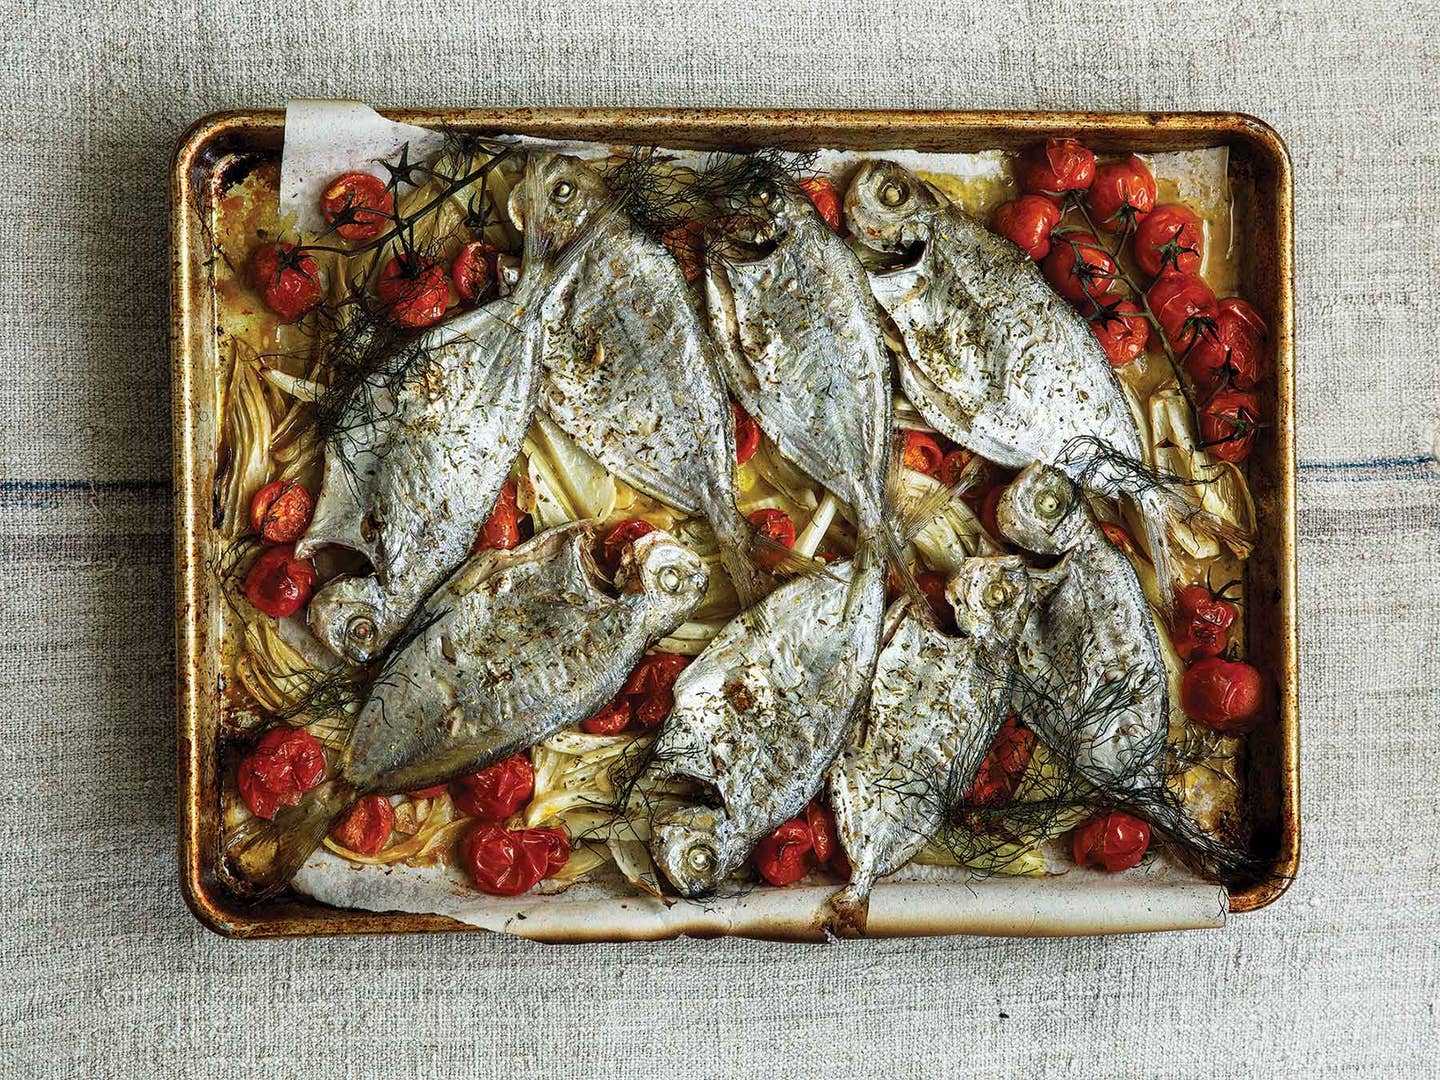 Oven-Roasted Whole Fish with Tomatoes and Fennel